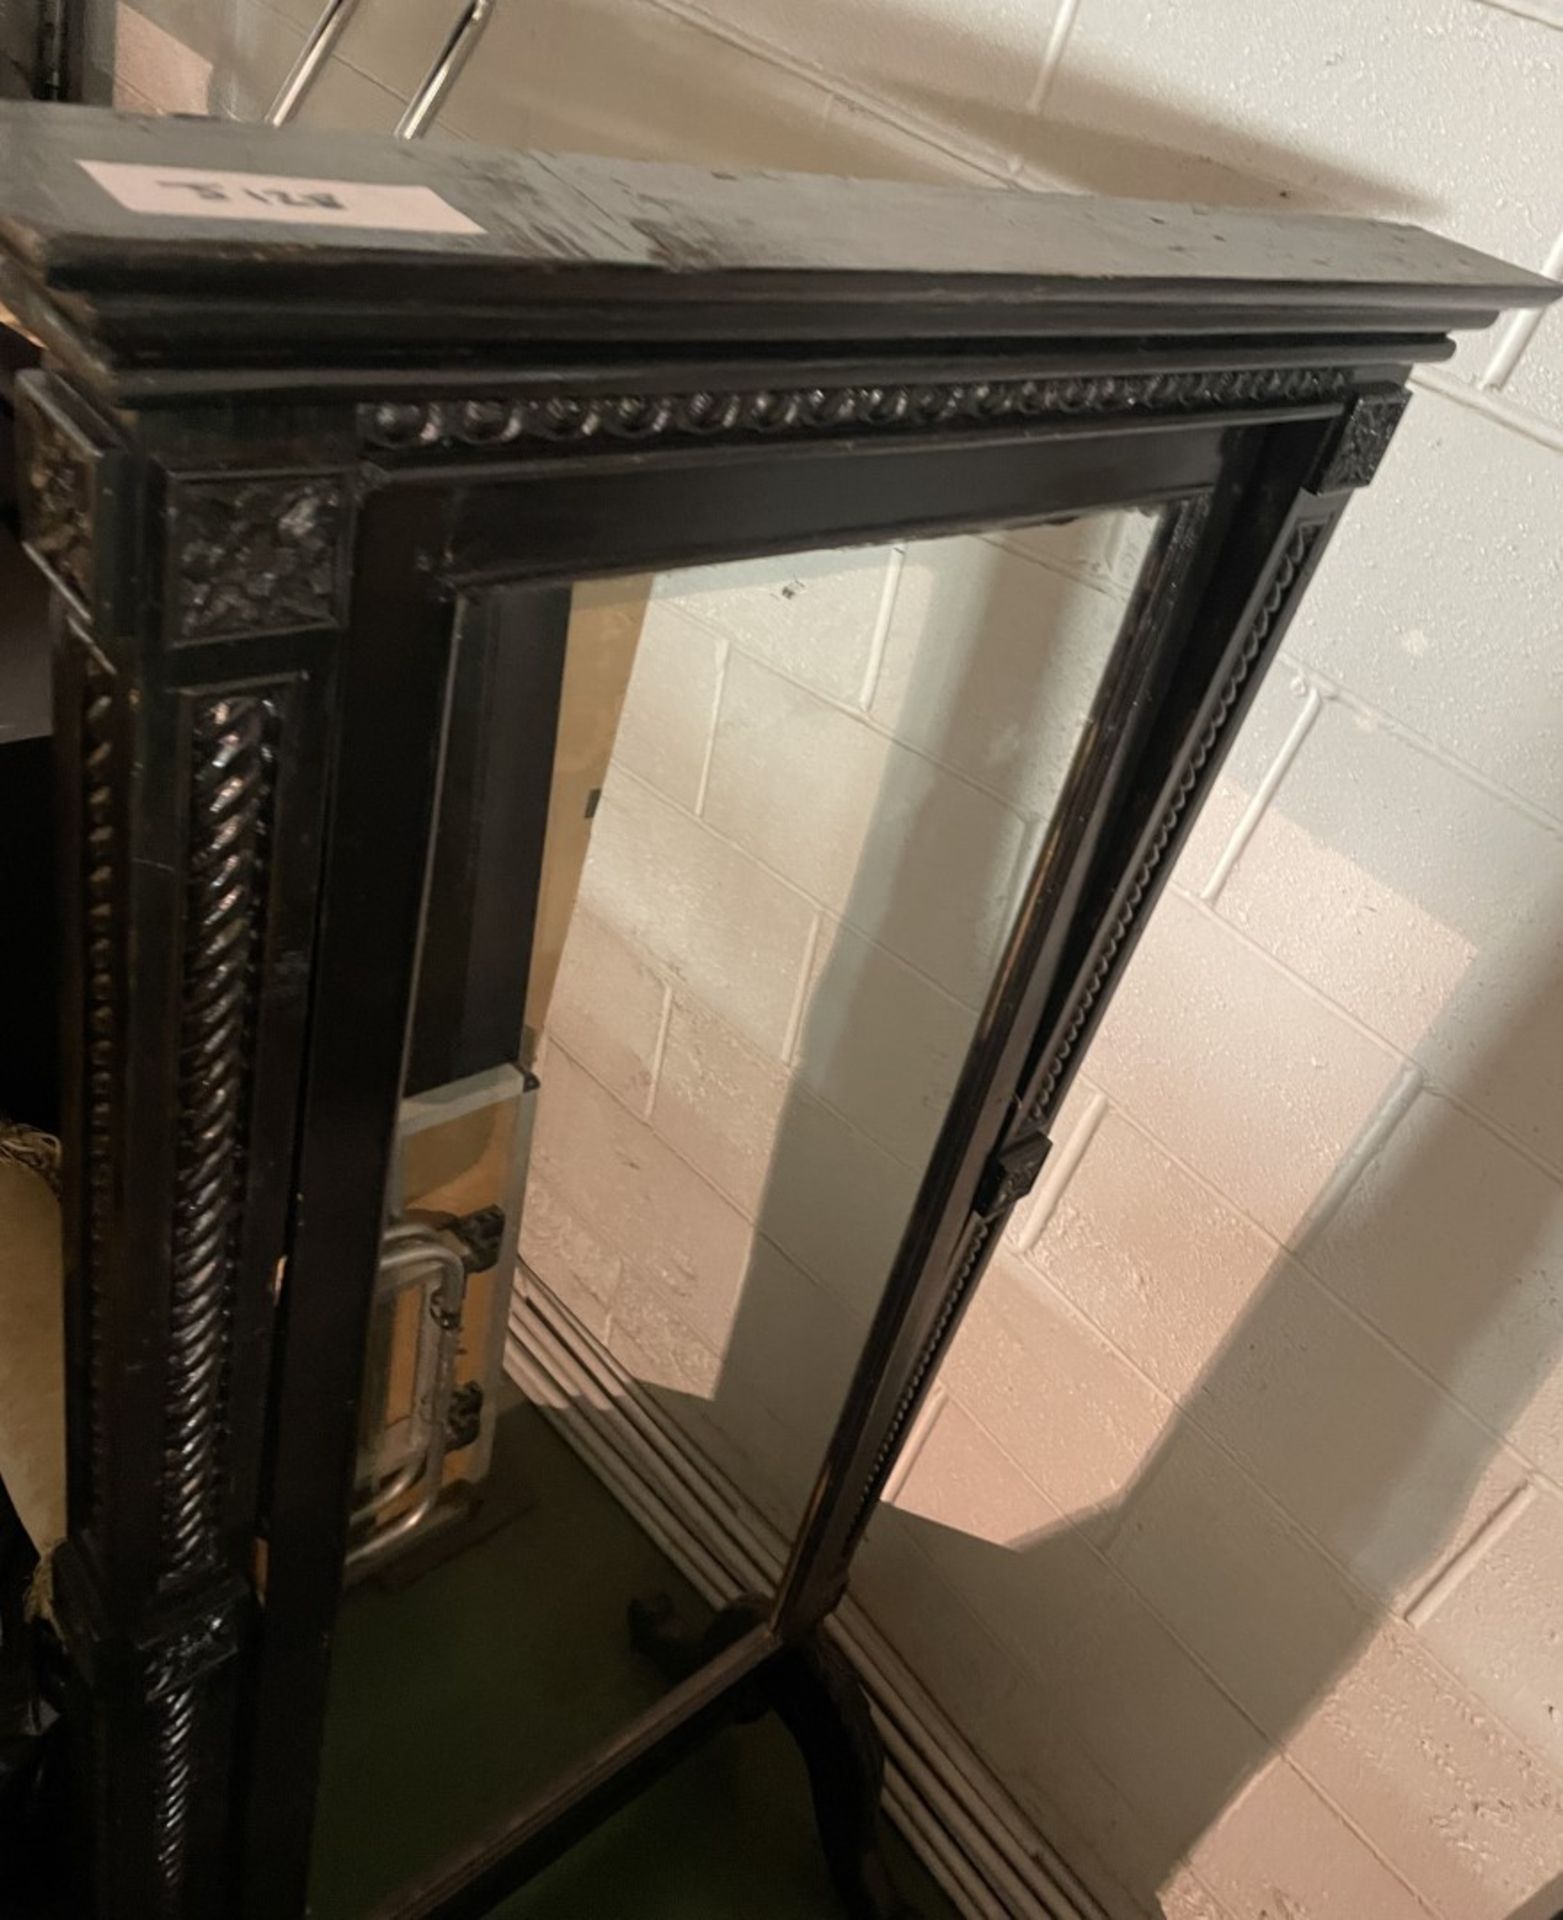 1 x Large Old Jacobean Style Floor Standing Black Mirror With Wonderful Detail - Approx 85x168Cm - - Image 11 of 14